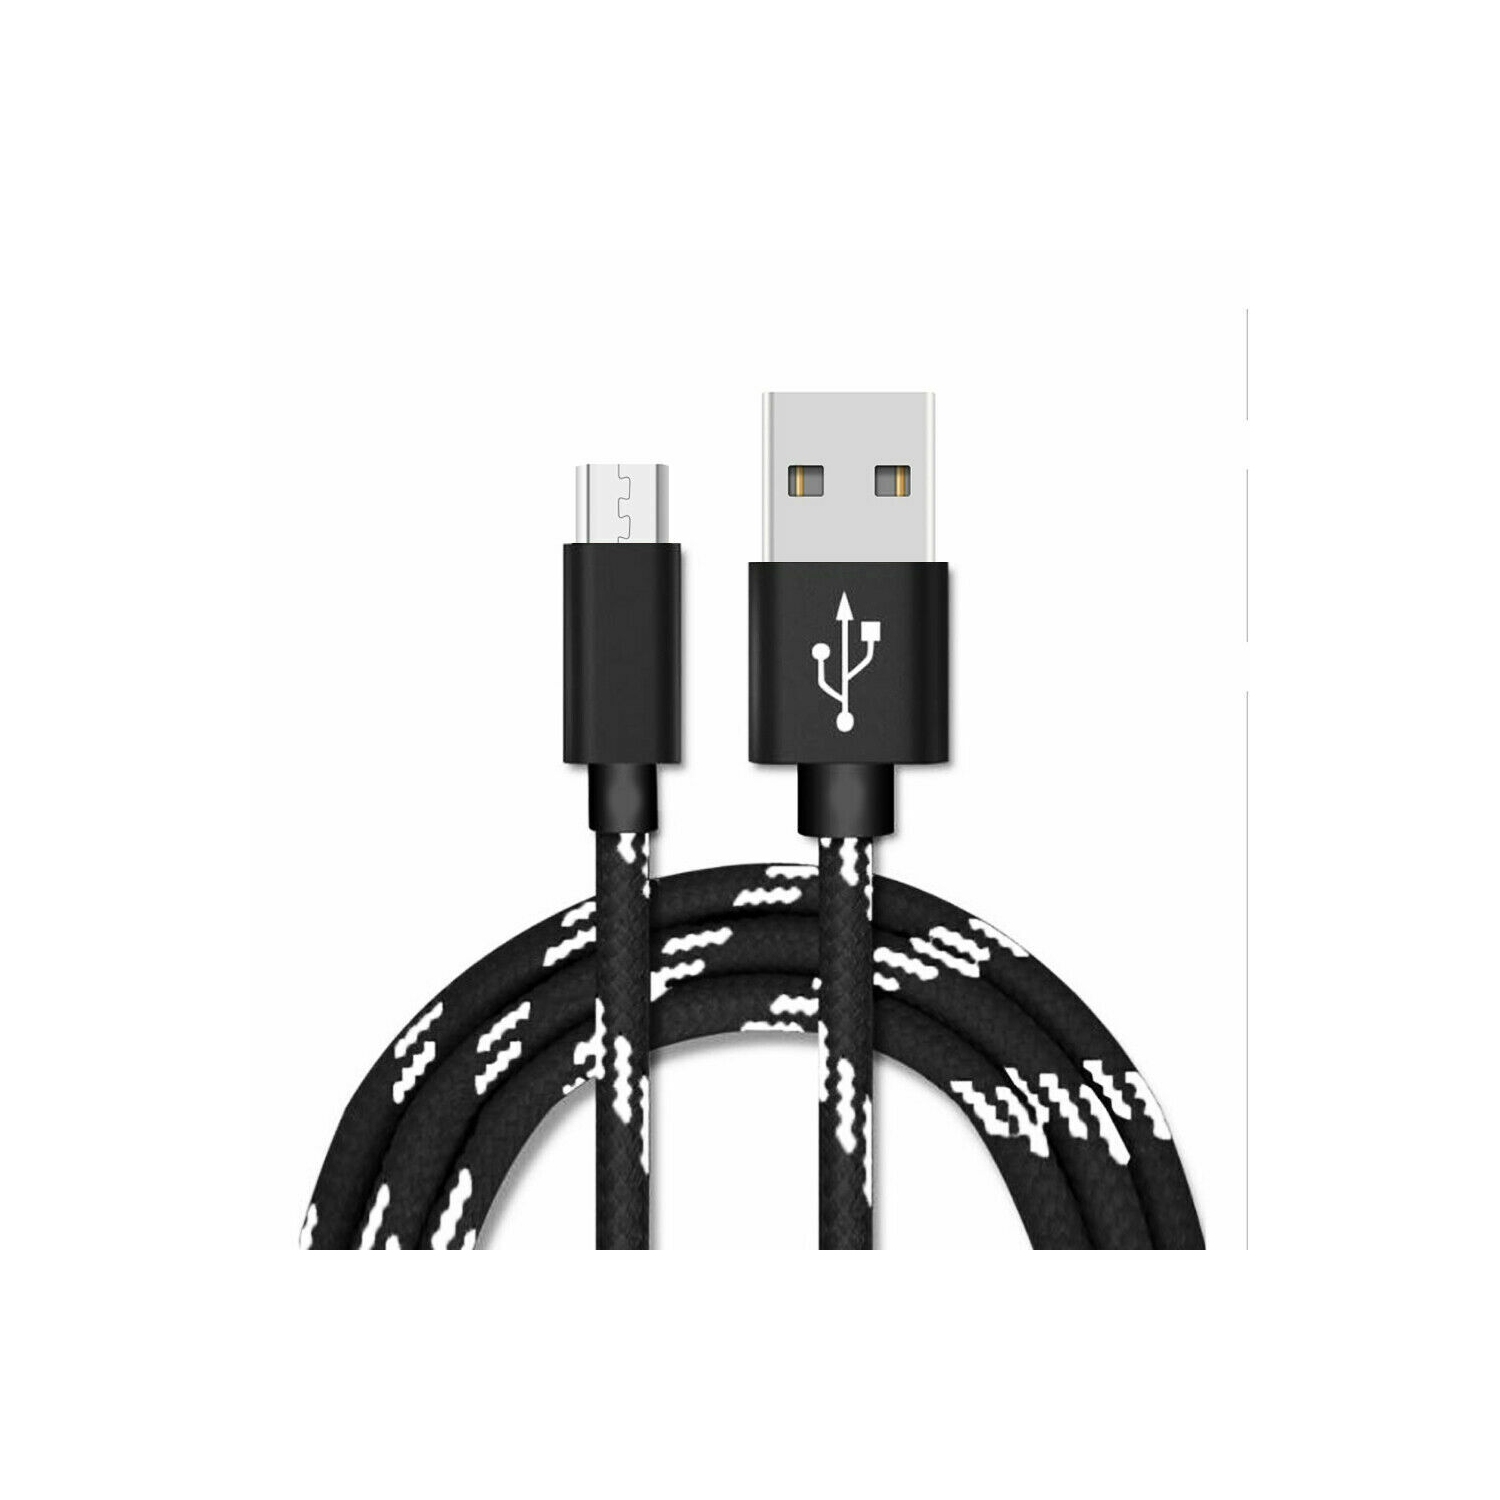 6ft Micro USB Cable Nylon Braided Fast Quick Charger USB to Micro USB 2.0 Android Charging Cord for Galaxy S7 S6 S5 Edge A10, J3 Prime, Redmi Note 5 Pro, PS4, Xbox One Controller